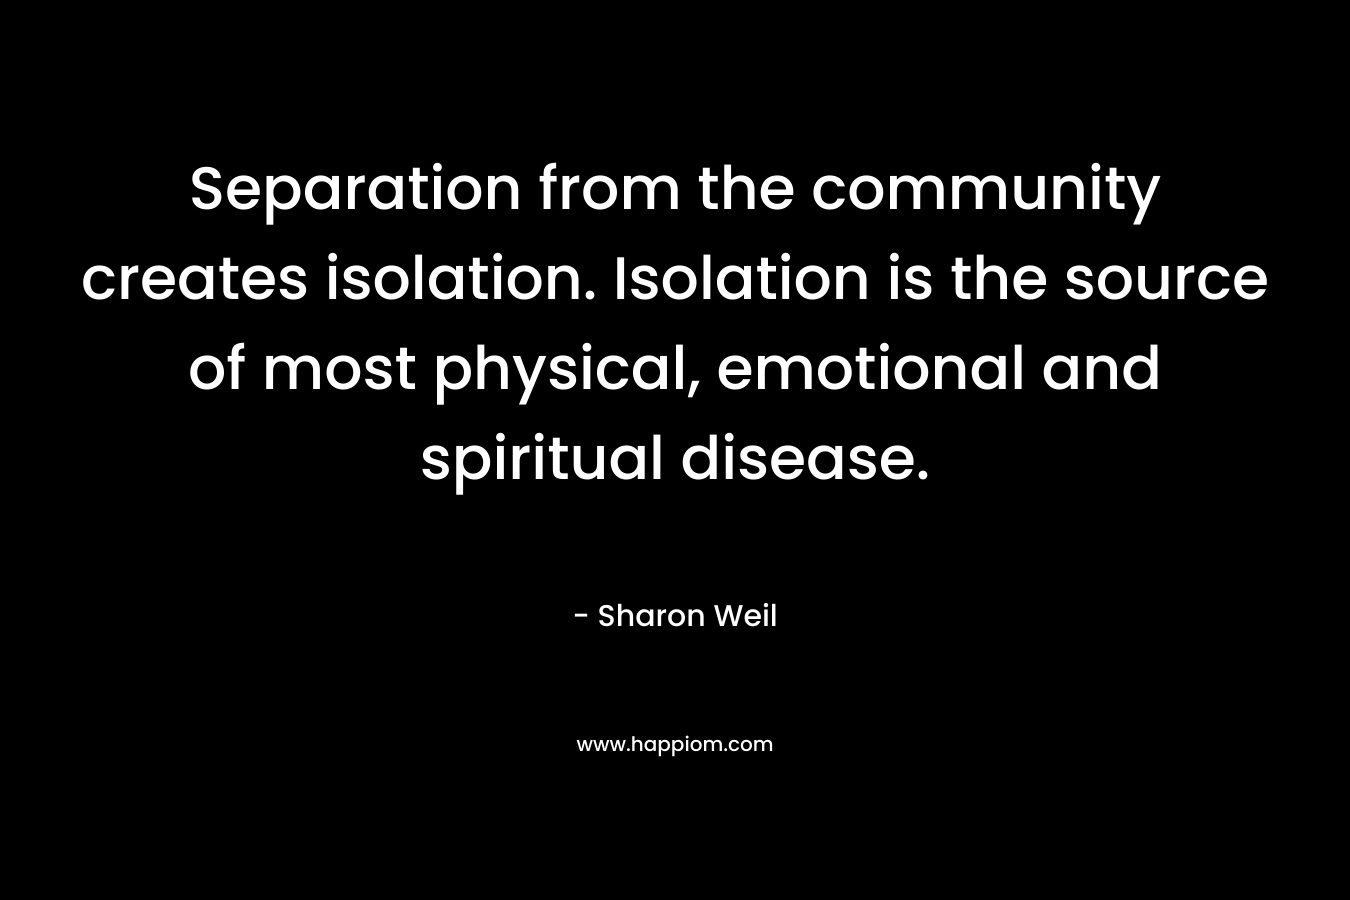 Separation from the community creates isolation. Isolation is the source of most physical, emotional and spiritual disease. – Sharon Weil